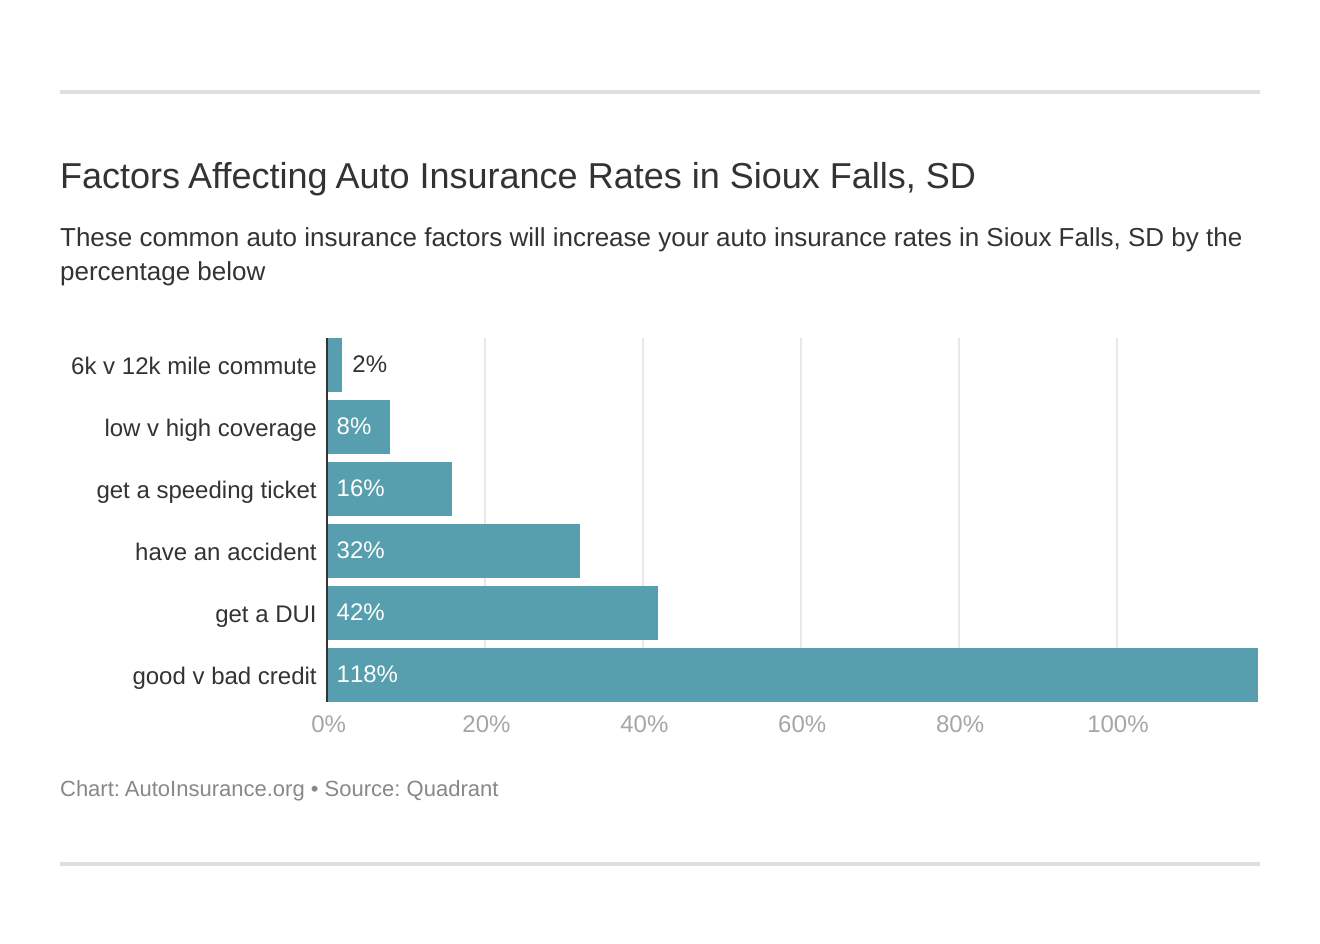 Factors Affecting Auto Insurance Rates in Sioux Falls, SD